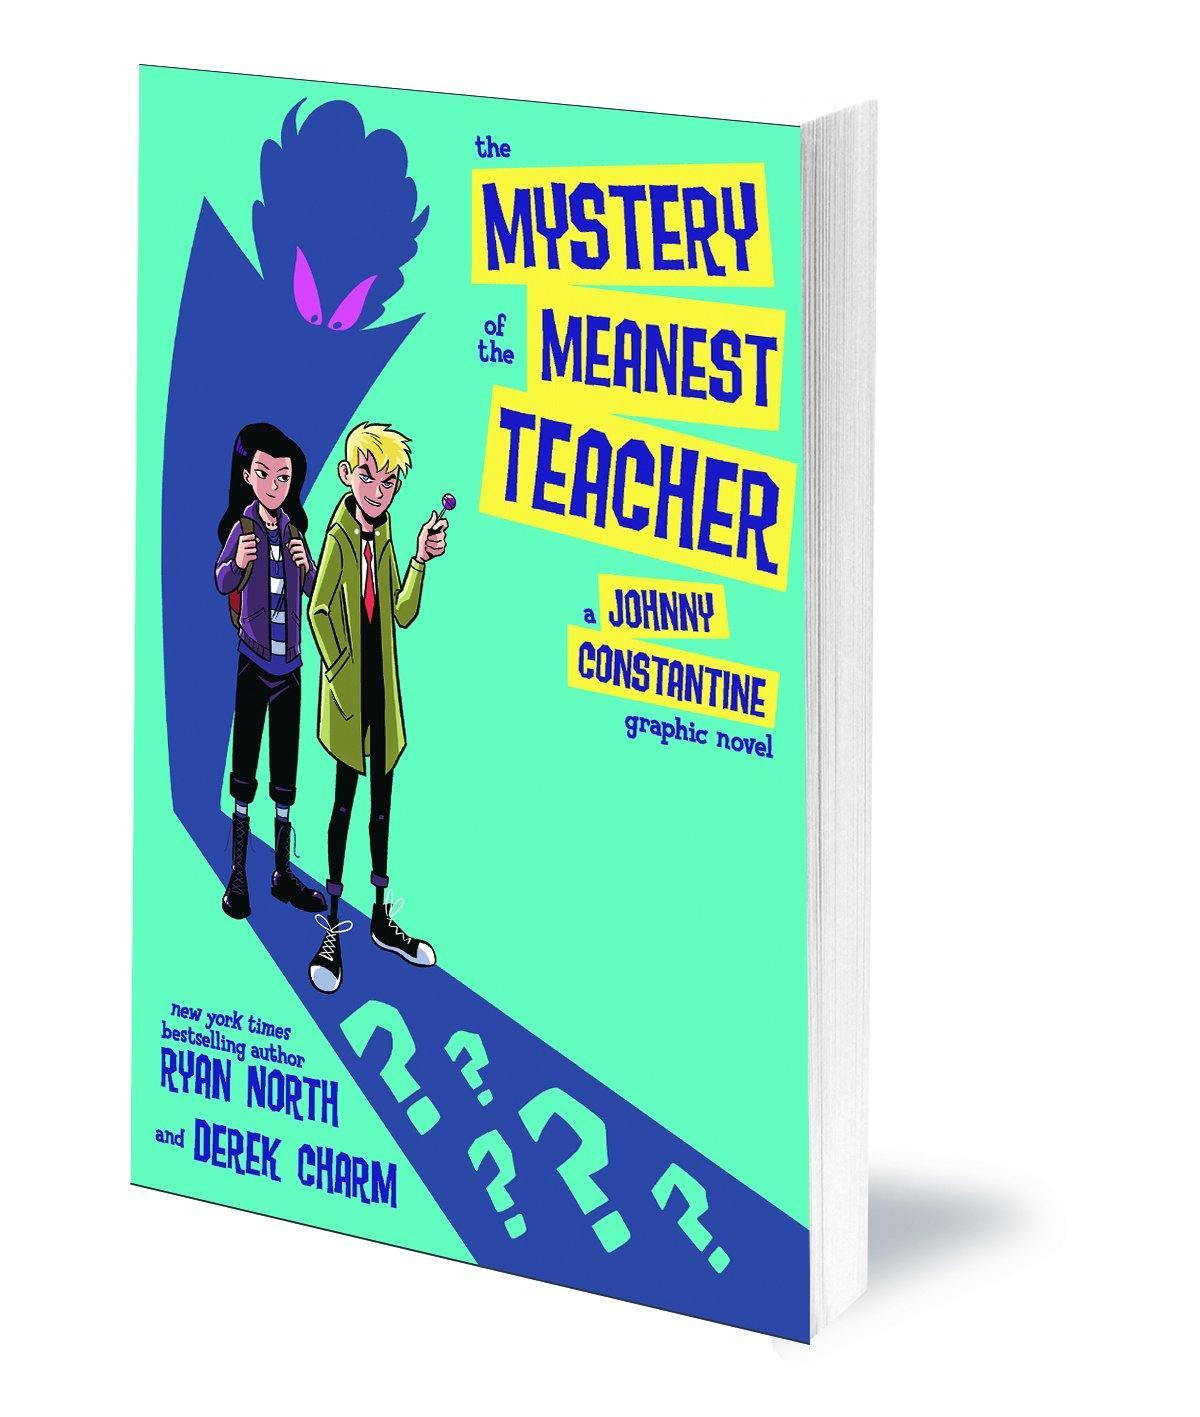 MYSTERY OF THE MEANEST TEACHER A JOHNNY CONSTANTINE GRAPHIC NOVEL TP (SHIPS 06-01-21) - PCKComics.com